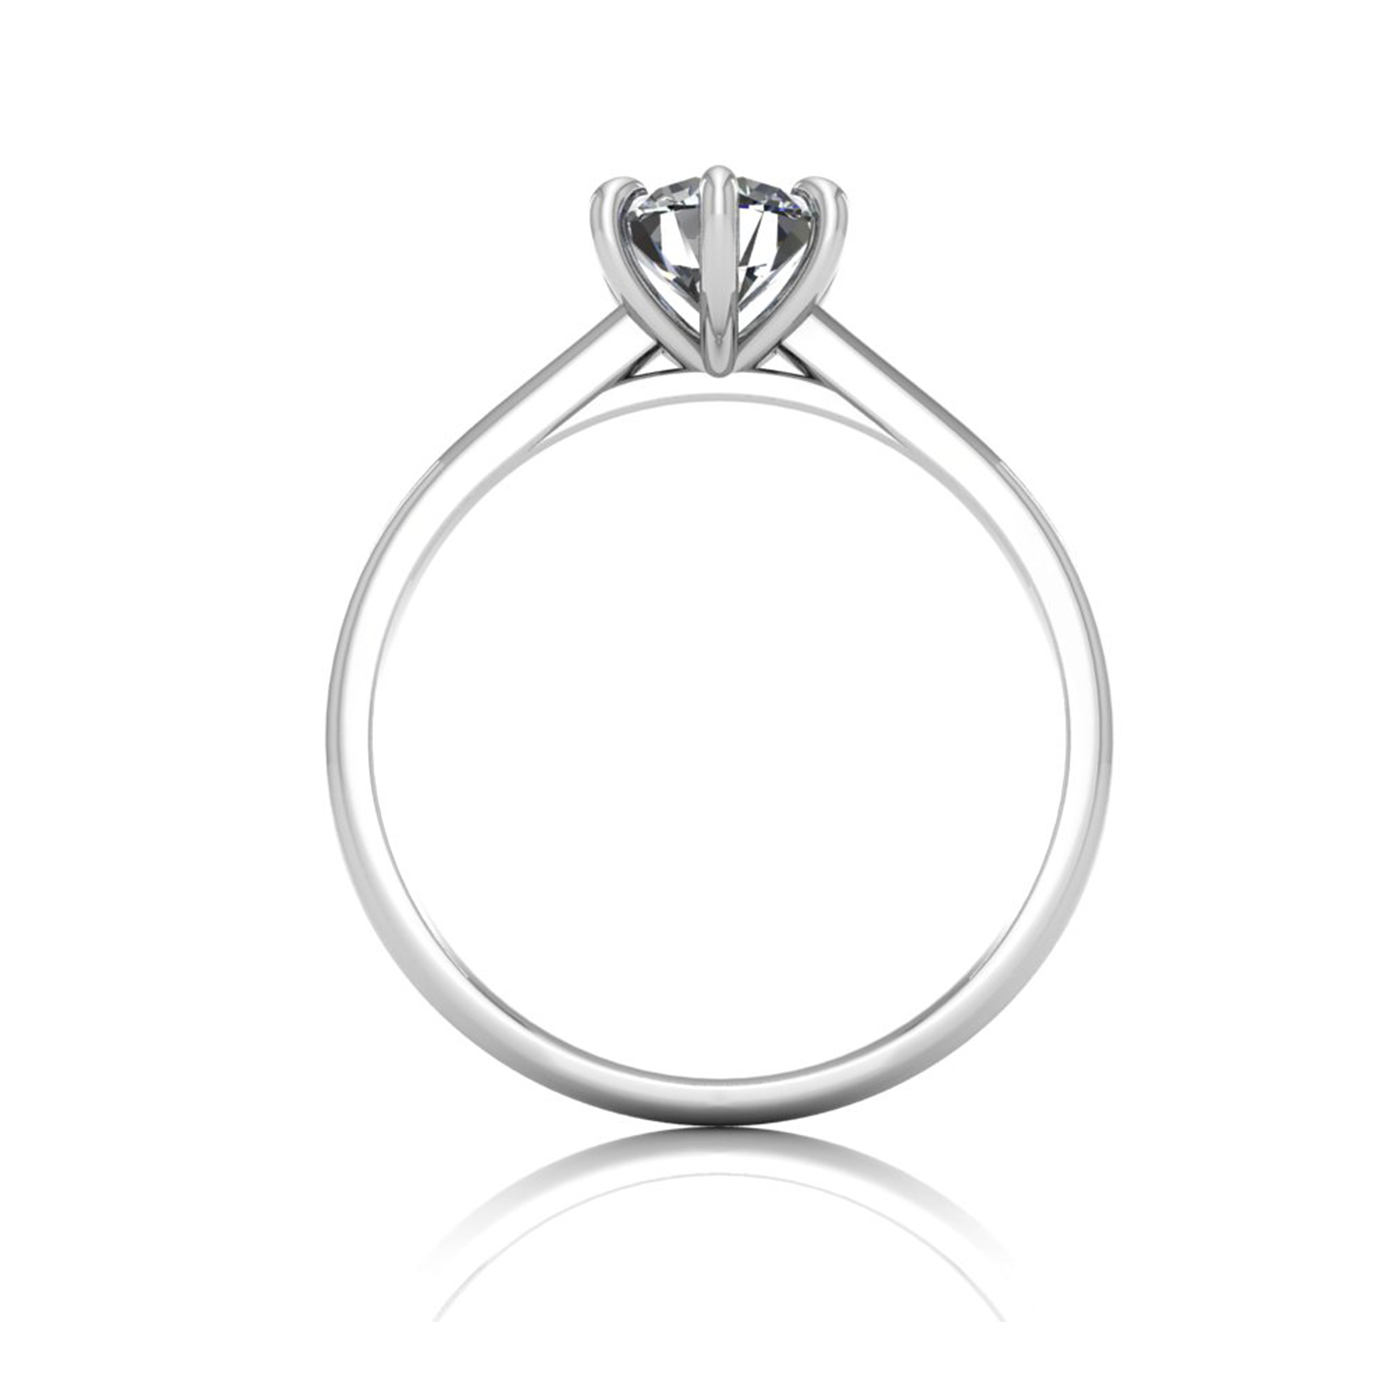 18k white gold 0,80 ct 6 prongs solitaire round cut diamond engagement ring with whisper thin band